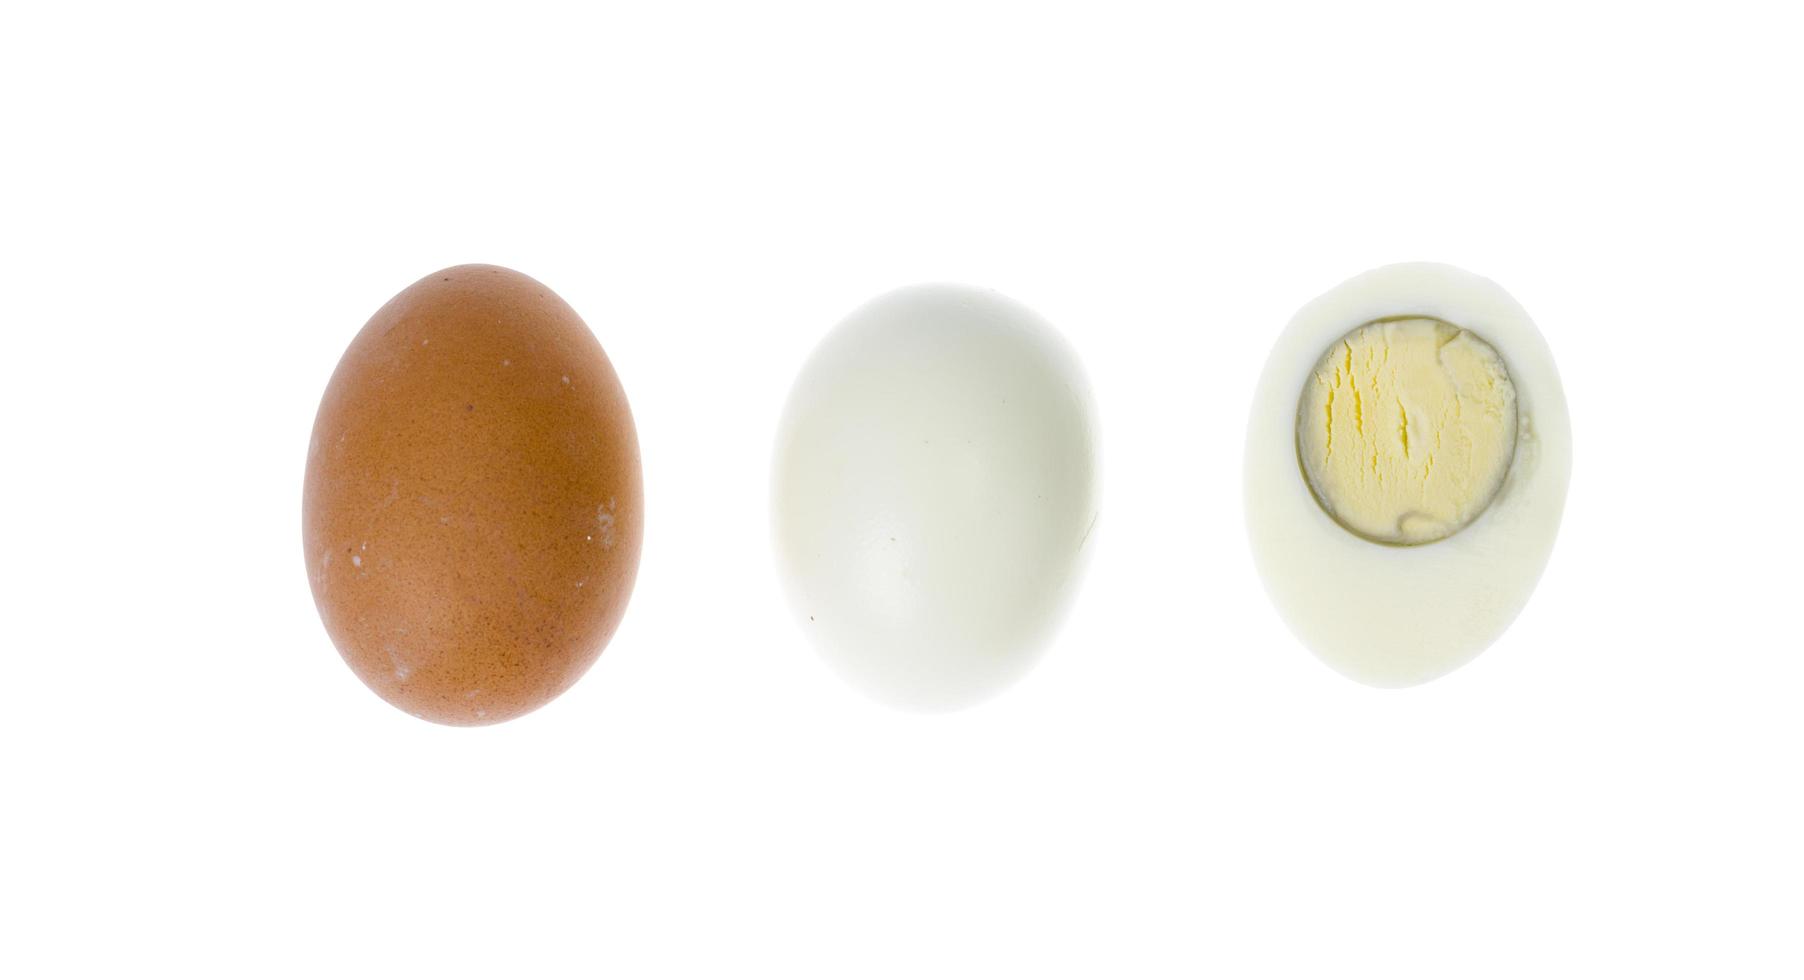 Boiled chicken eggs with colored shells on white background. photo